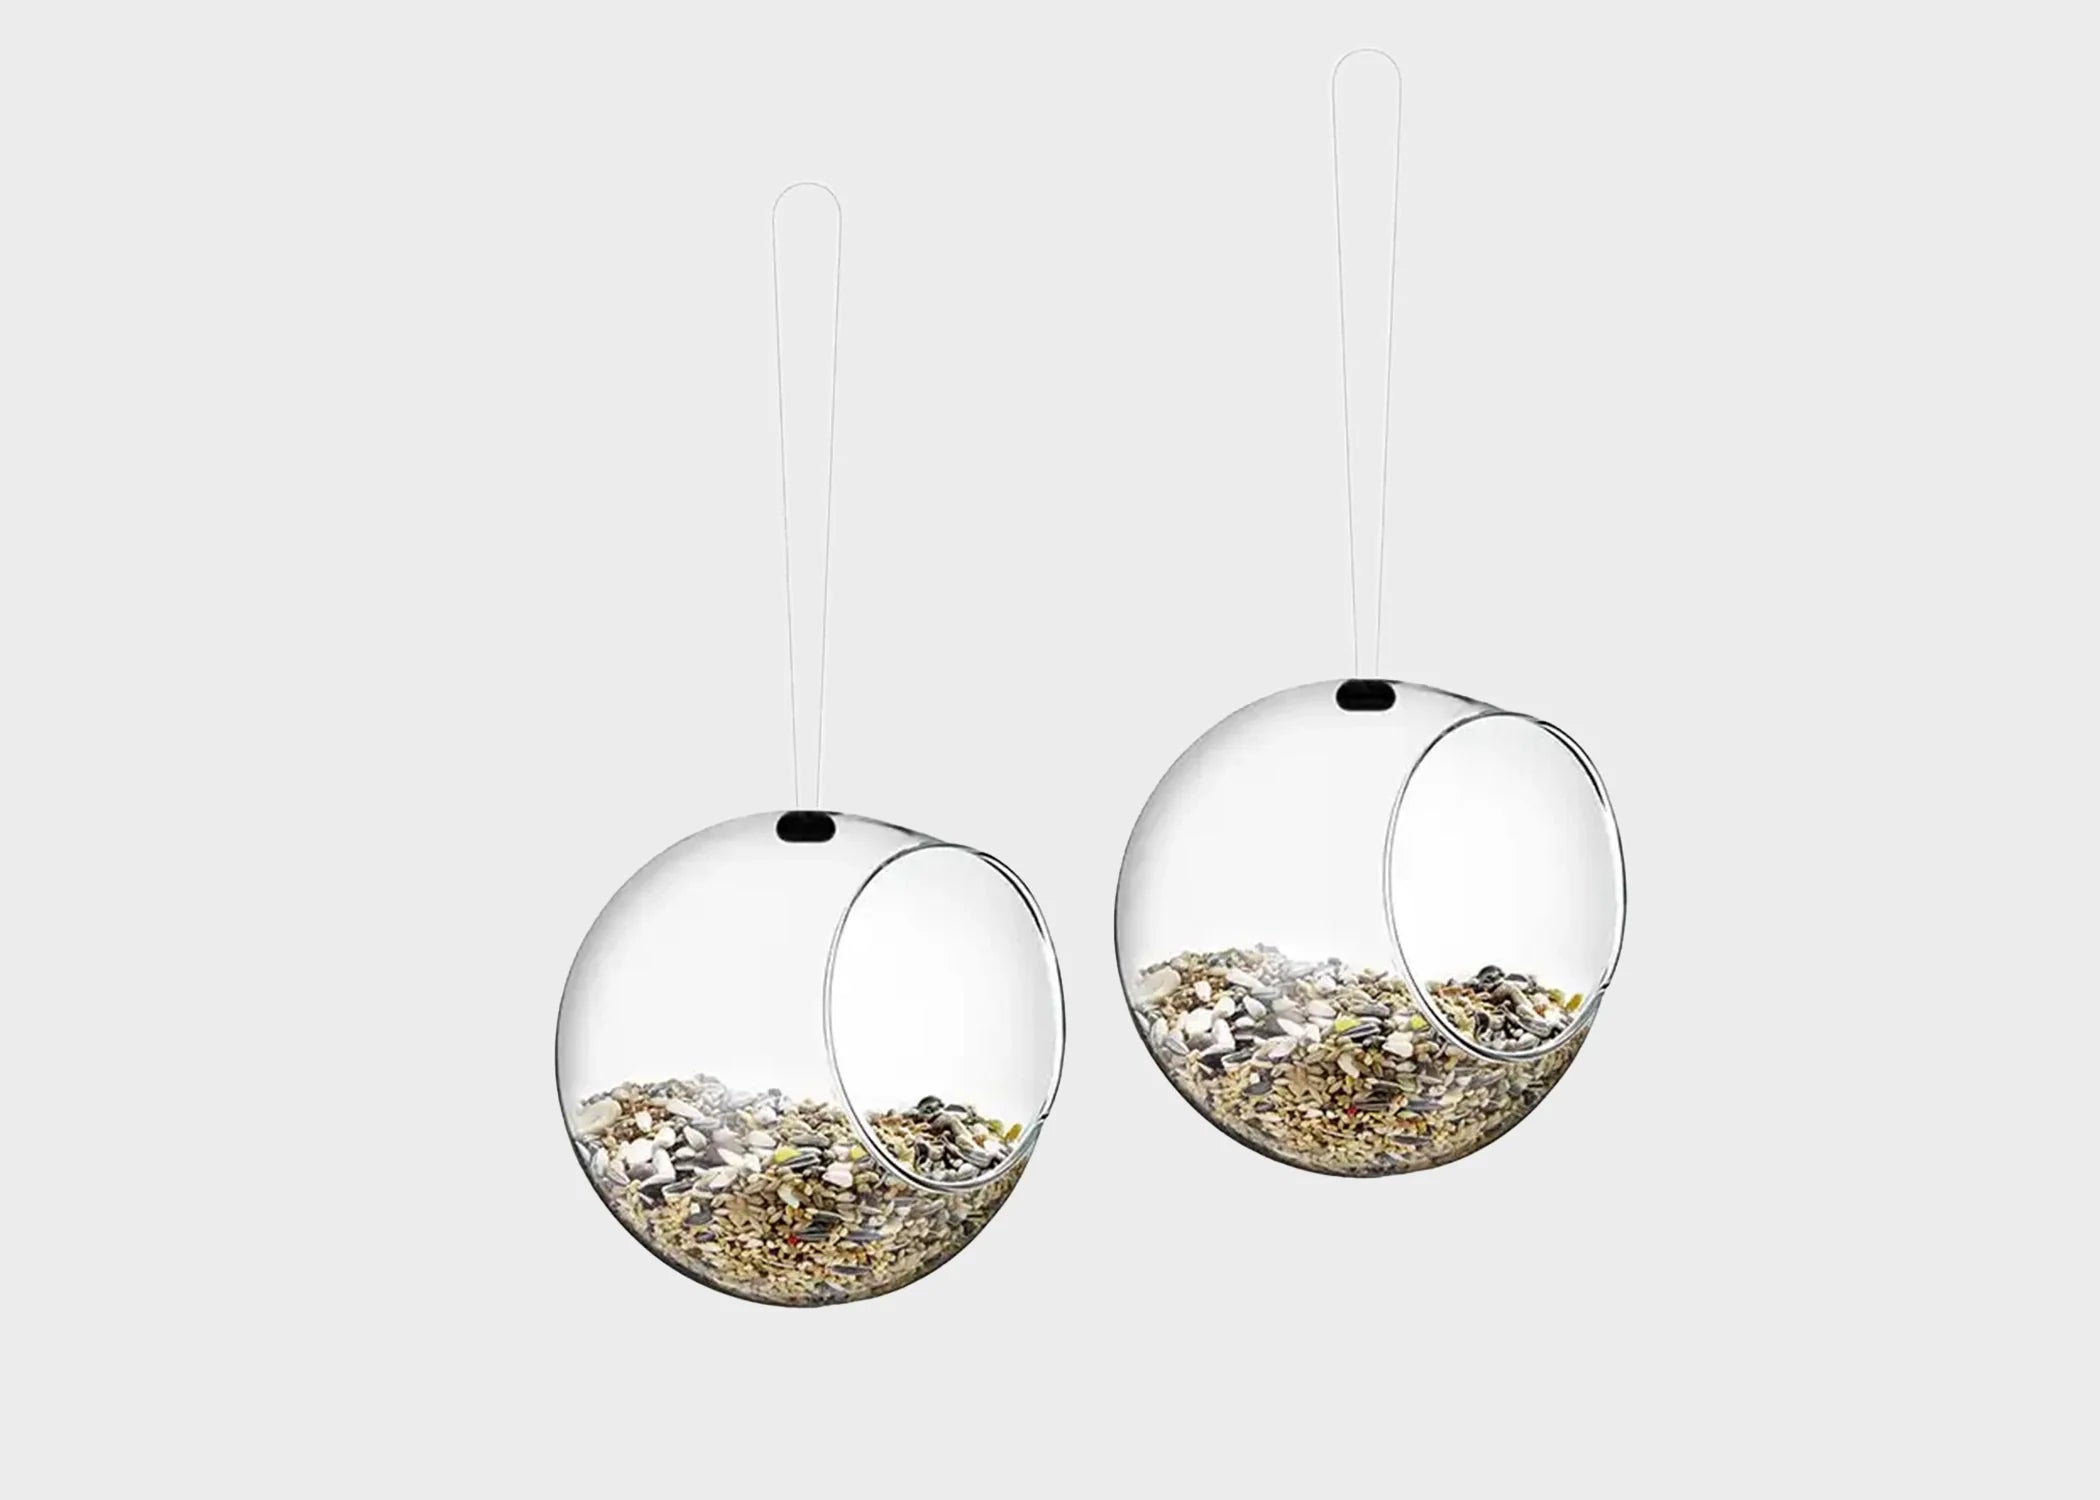 Two orb bird feeding glass balls by Eva Solo filled with bird seed